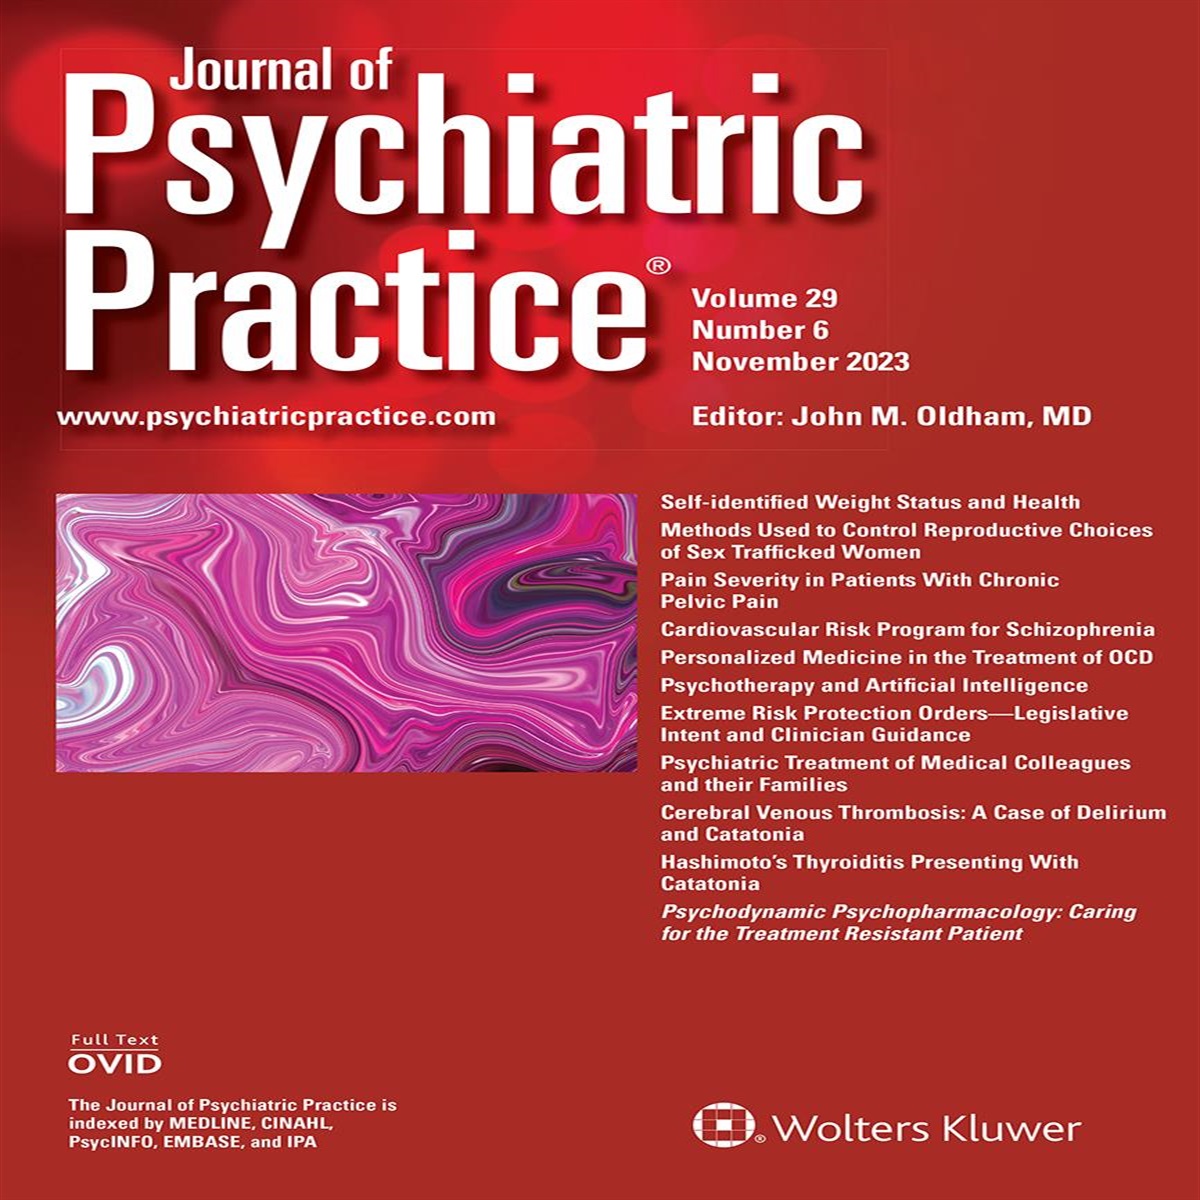 Psychiatric Treatment of Medical Colleagues and Their Families: Potential Risks